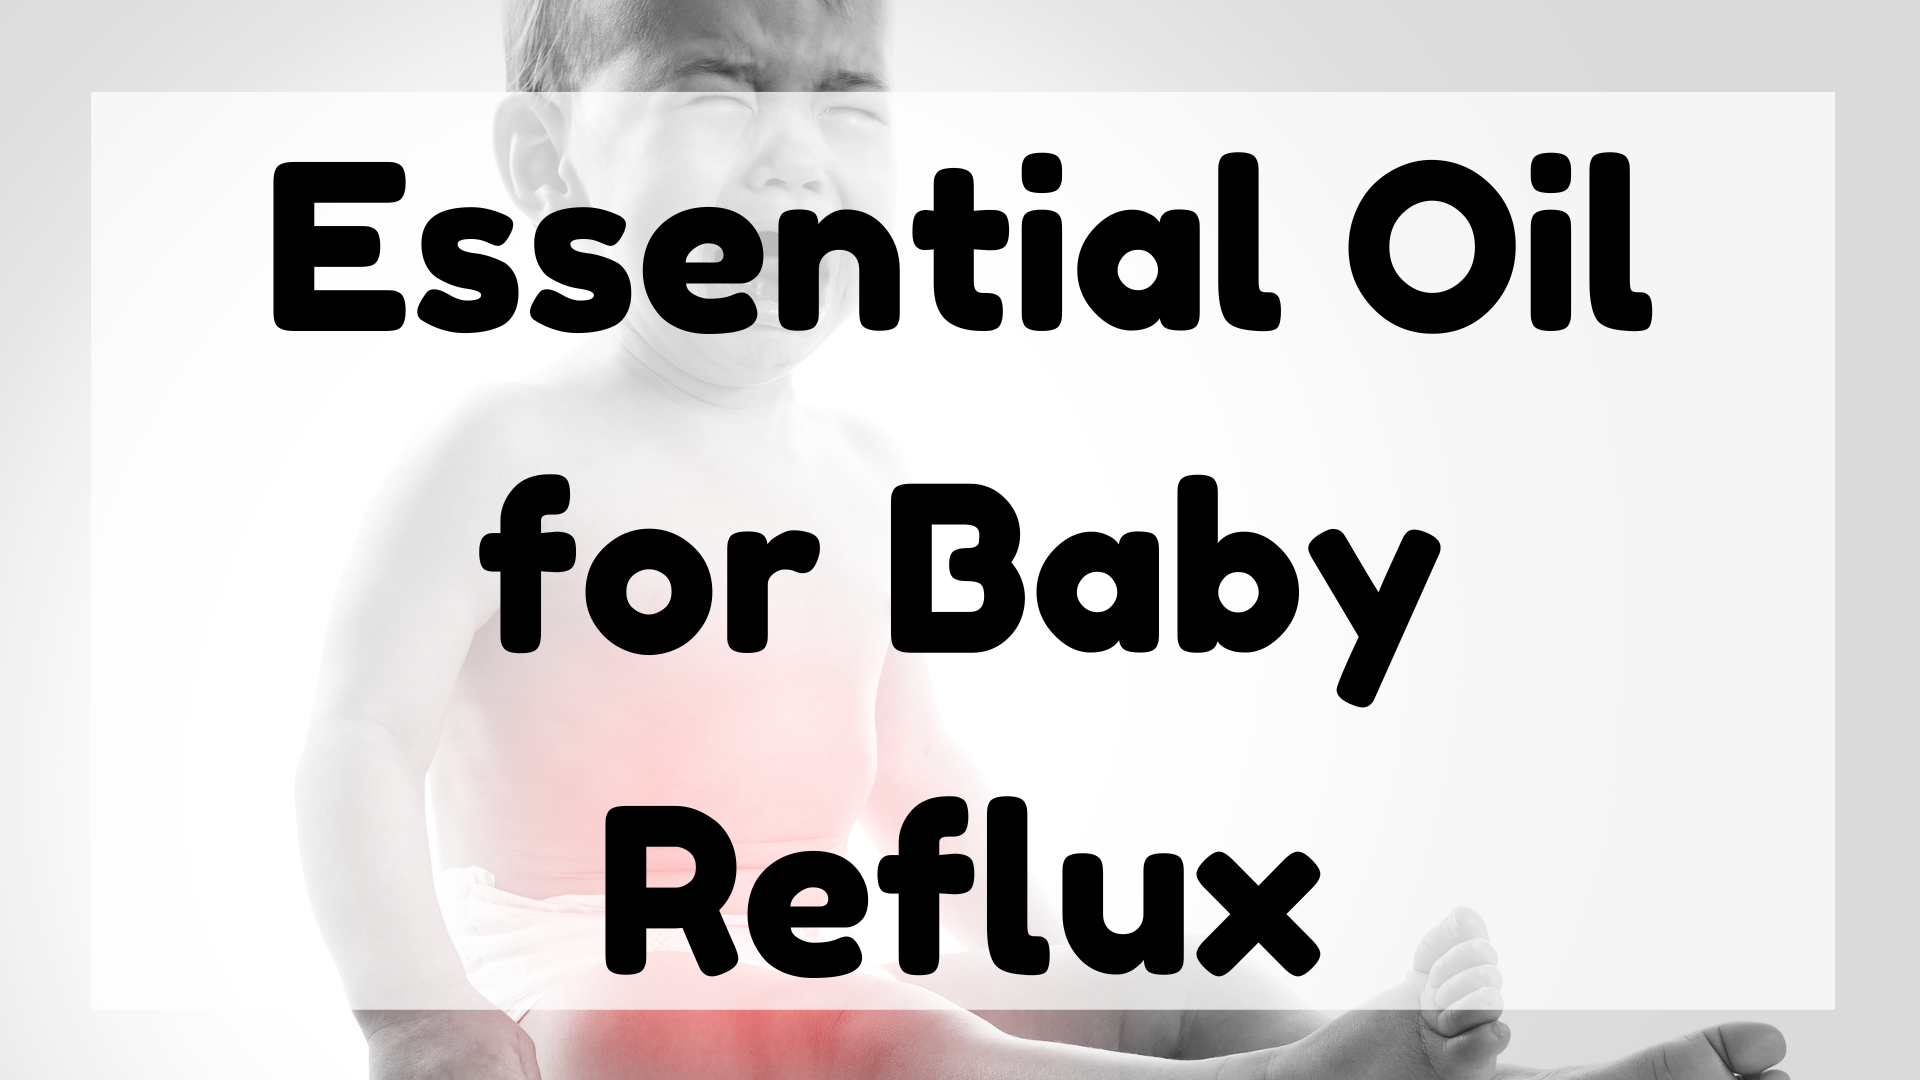 Essential Oil for Baby Reflux featured image